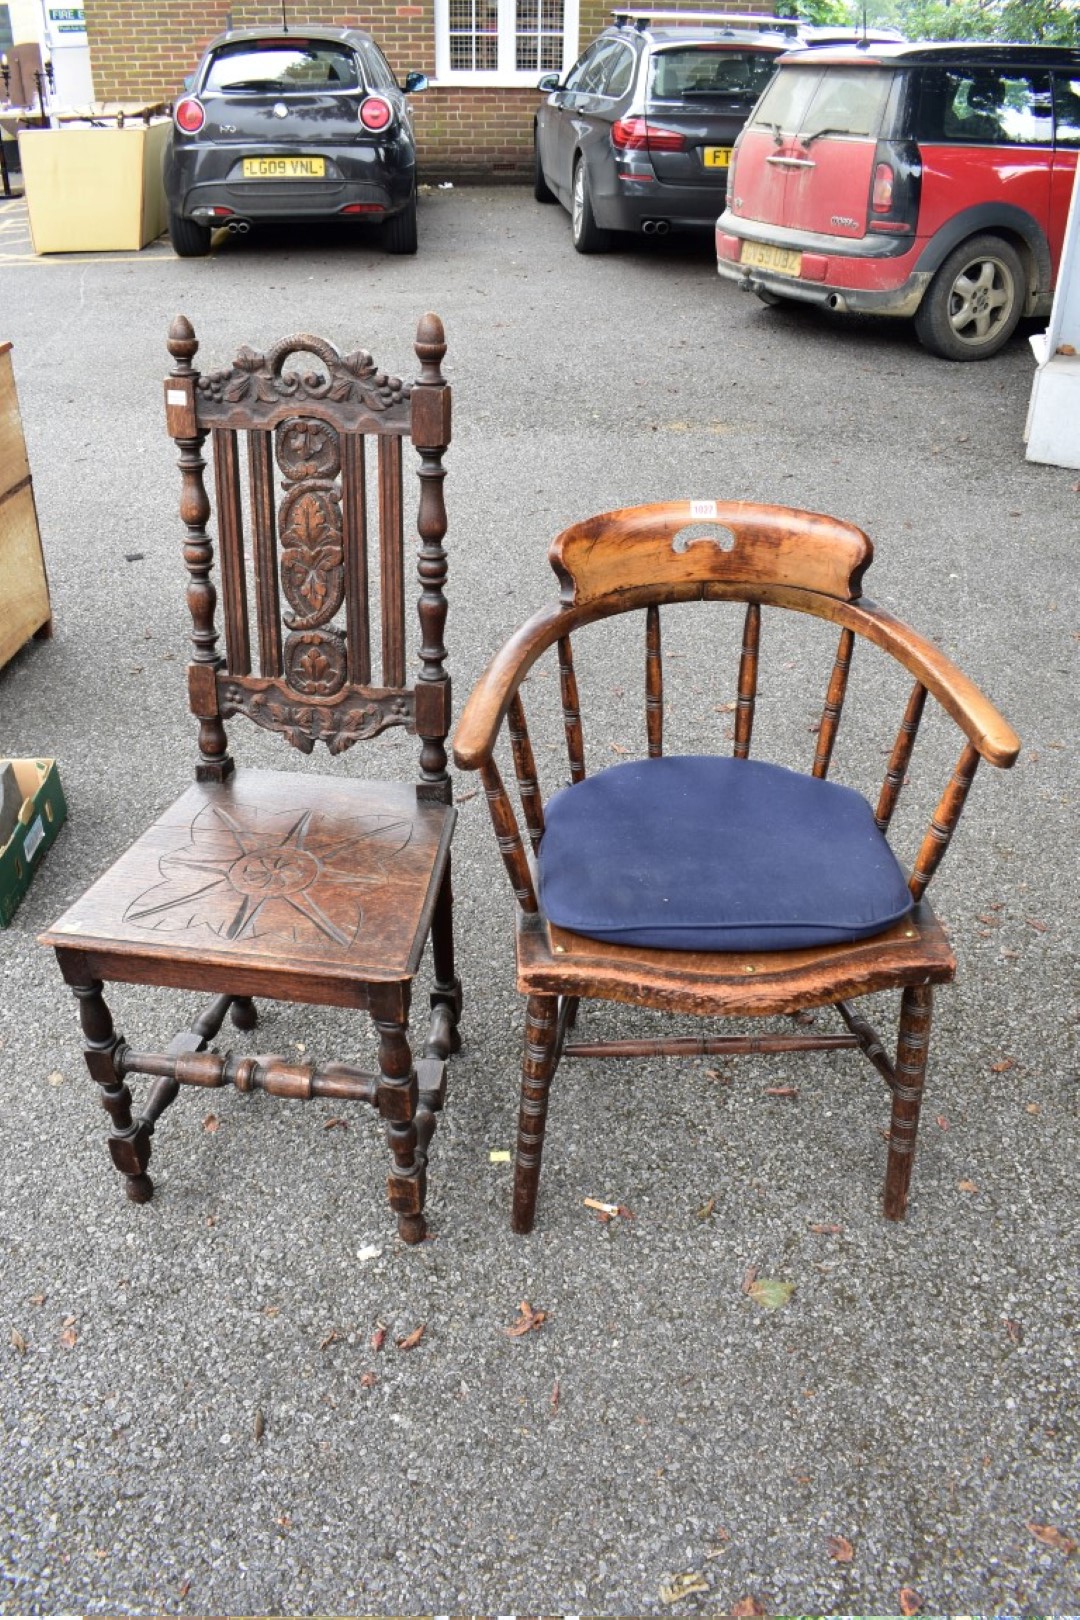 A circa 1880 carved oak chair; together with a desk type chair and an old trumpet work table.